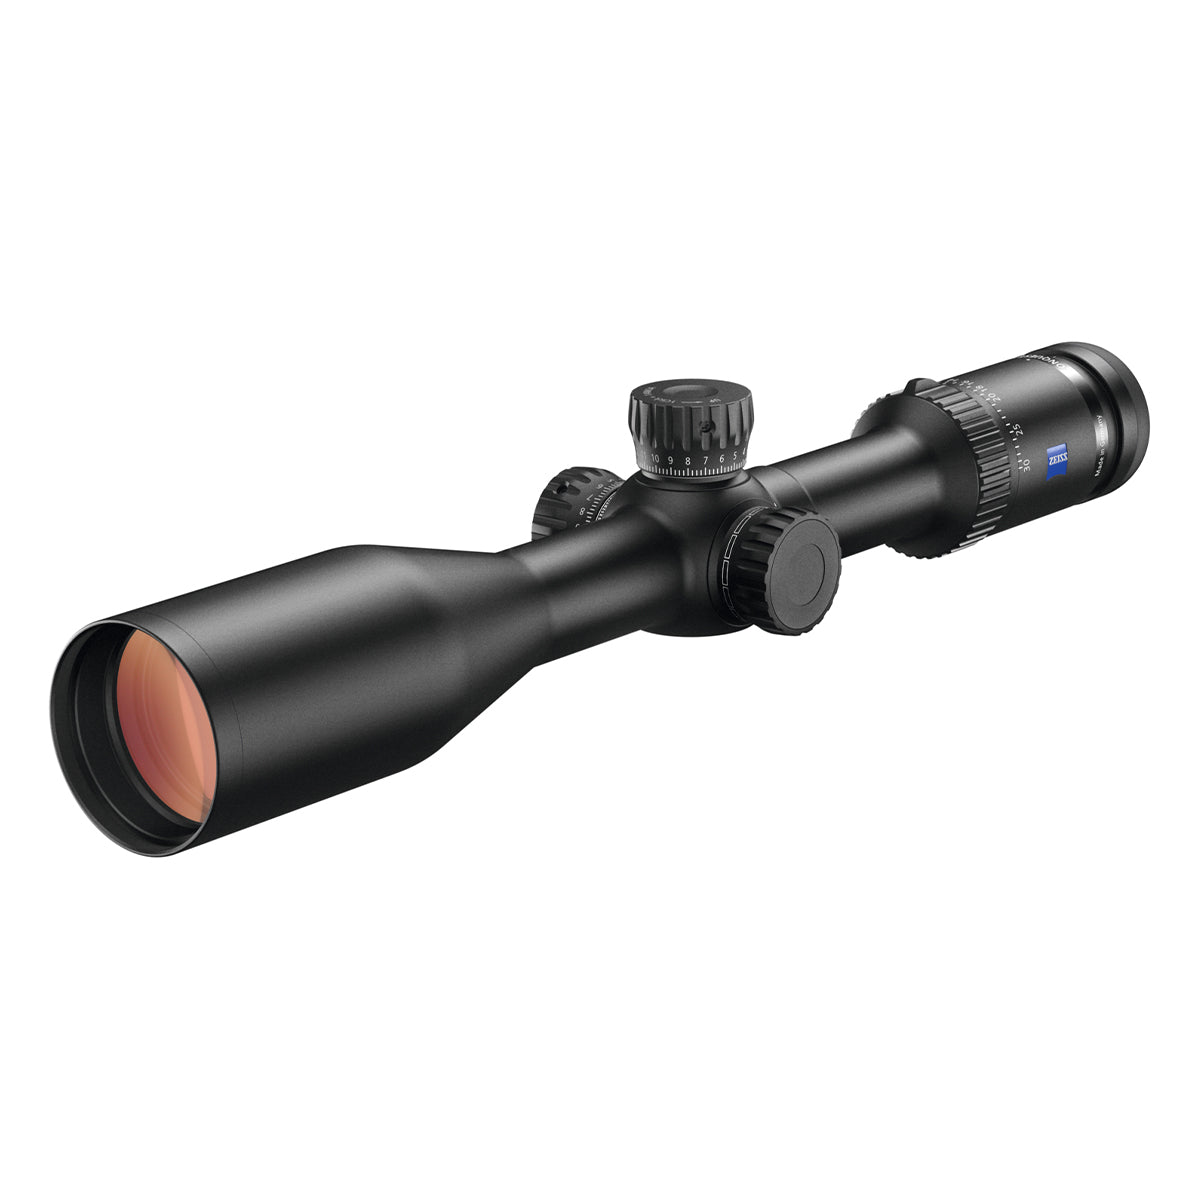 Zeiss Conquest V6 5-30x50 Riflescope w/ ZMOA-1 #93 Reticle in Zeiss Conquest V6 5-30x50 Riflescope w/ ZMOA-1 Reticle by Zeiss | Optics - goHUNT Shop by GOHUNT | Zeiss - GOHUNT Shop